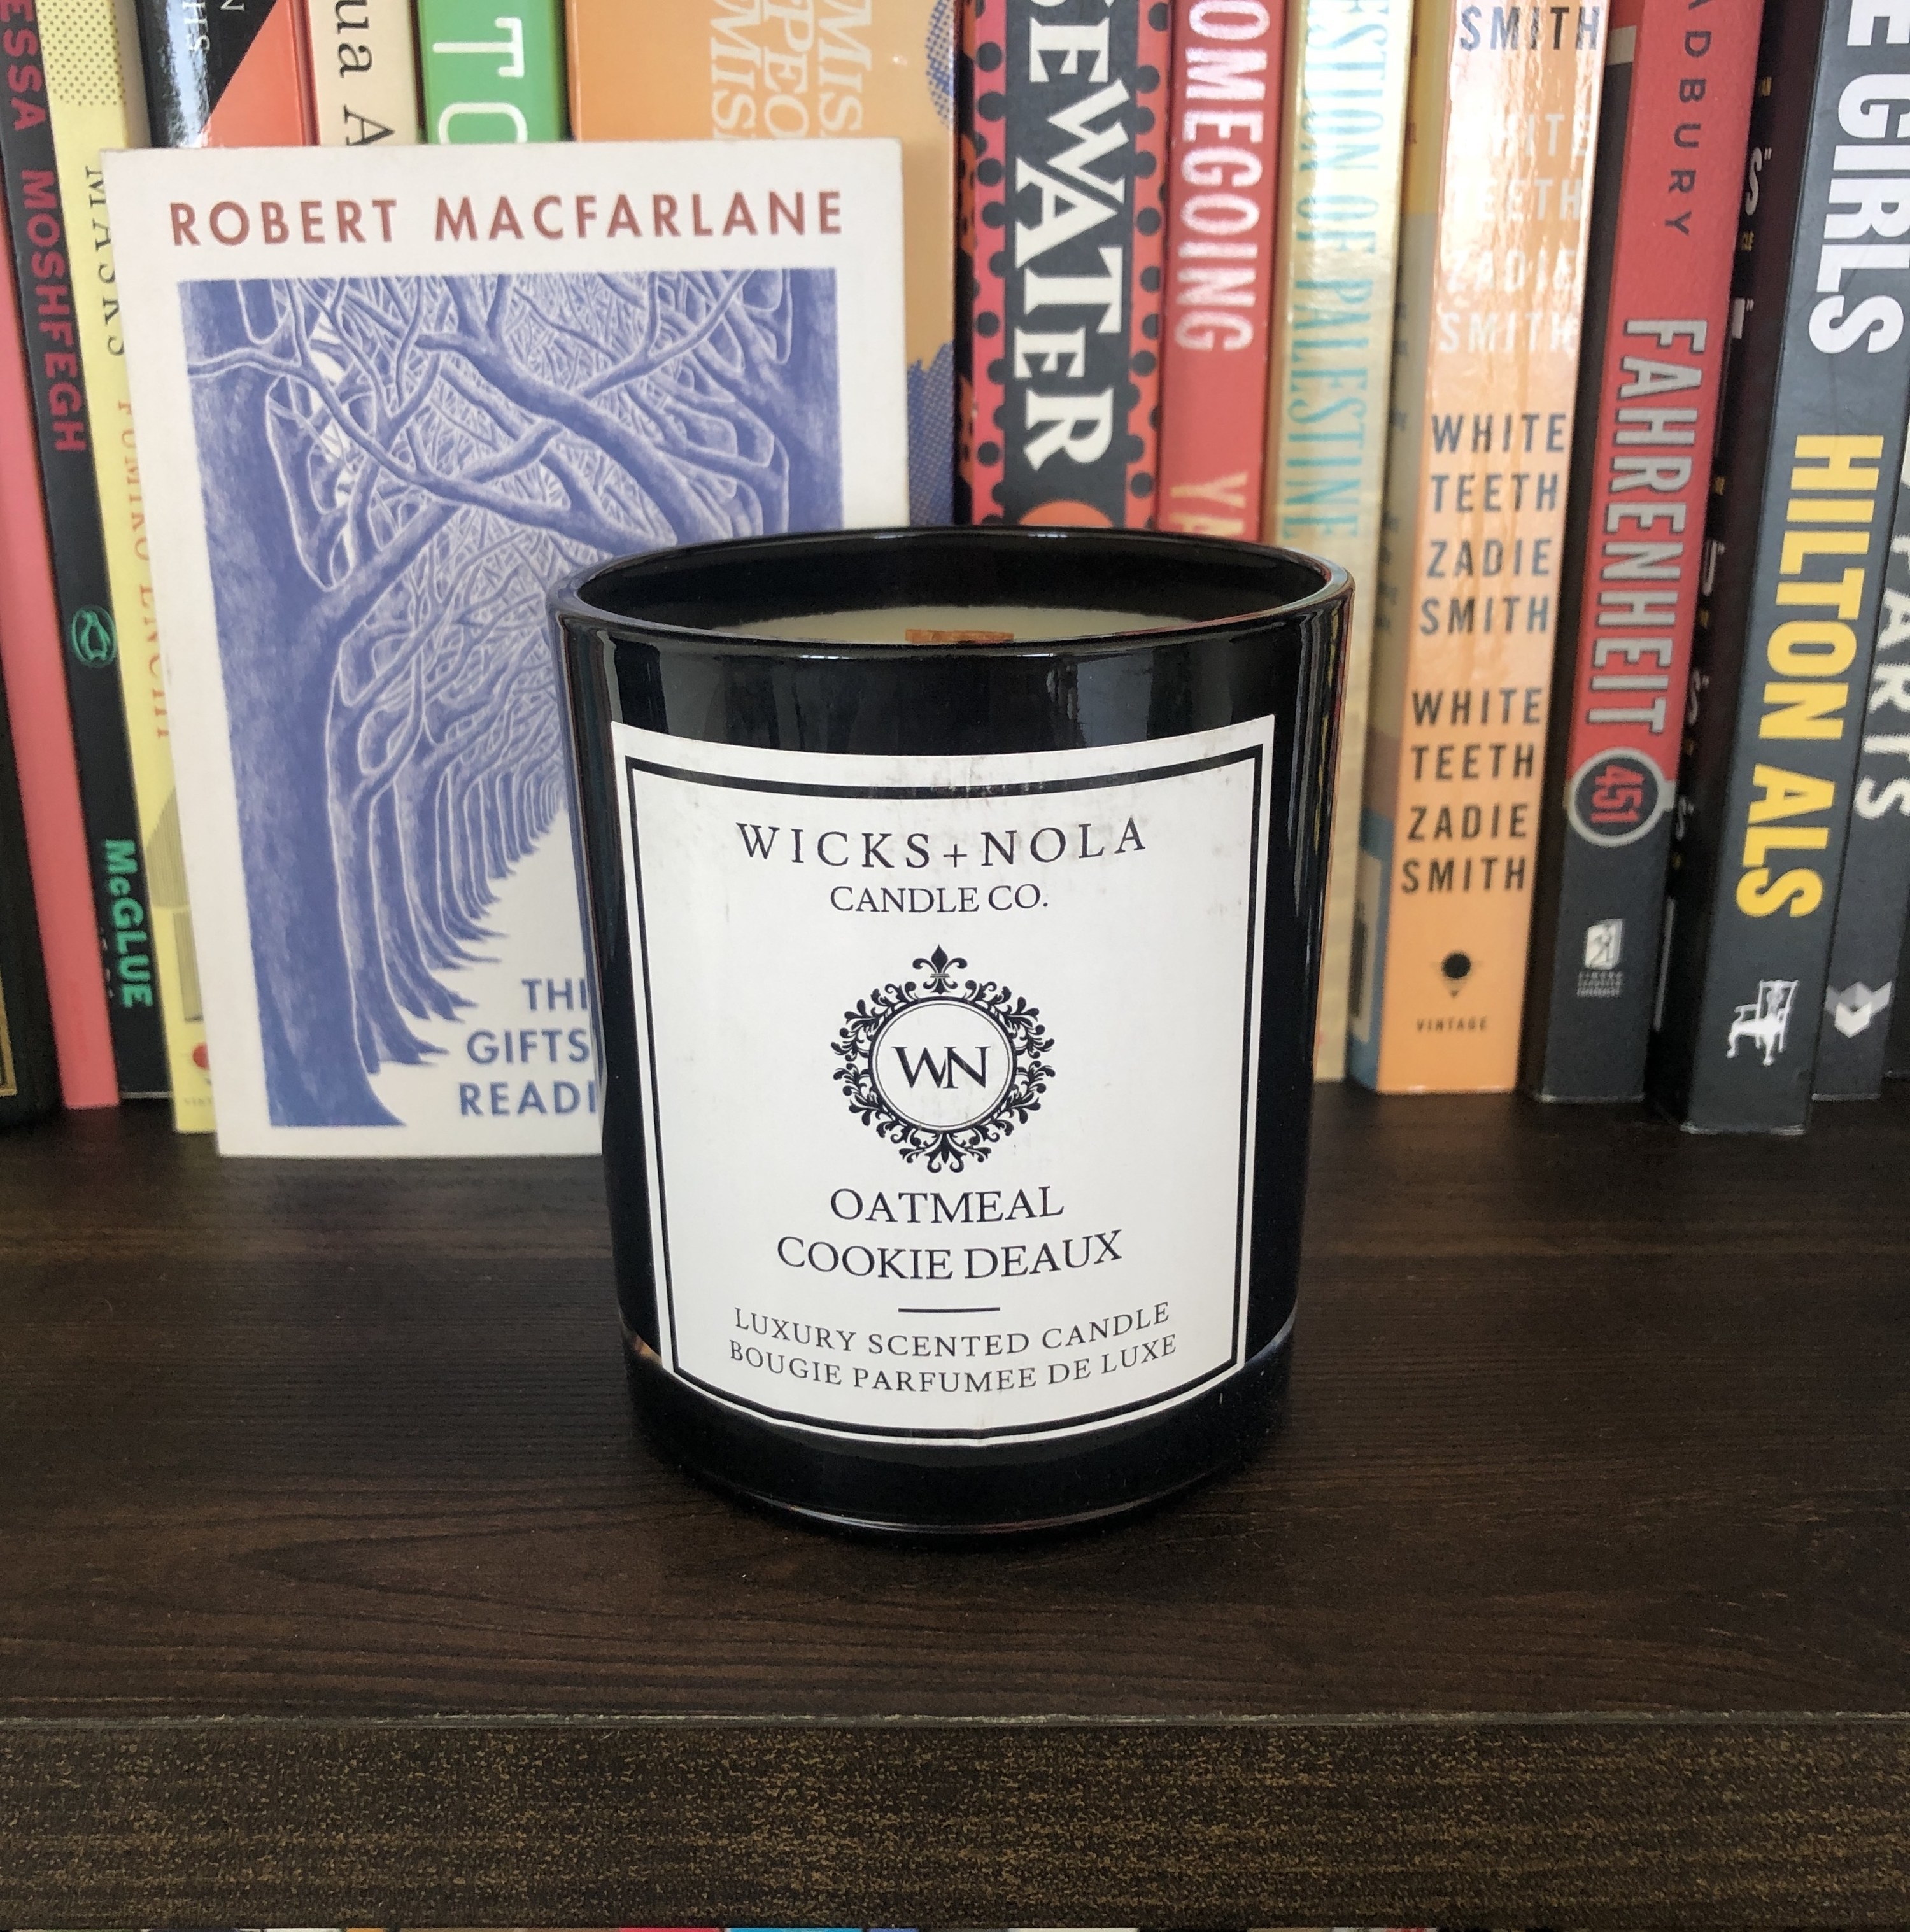 The candle is shown on a bookshelf